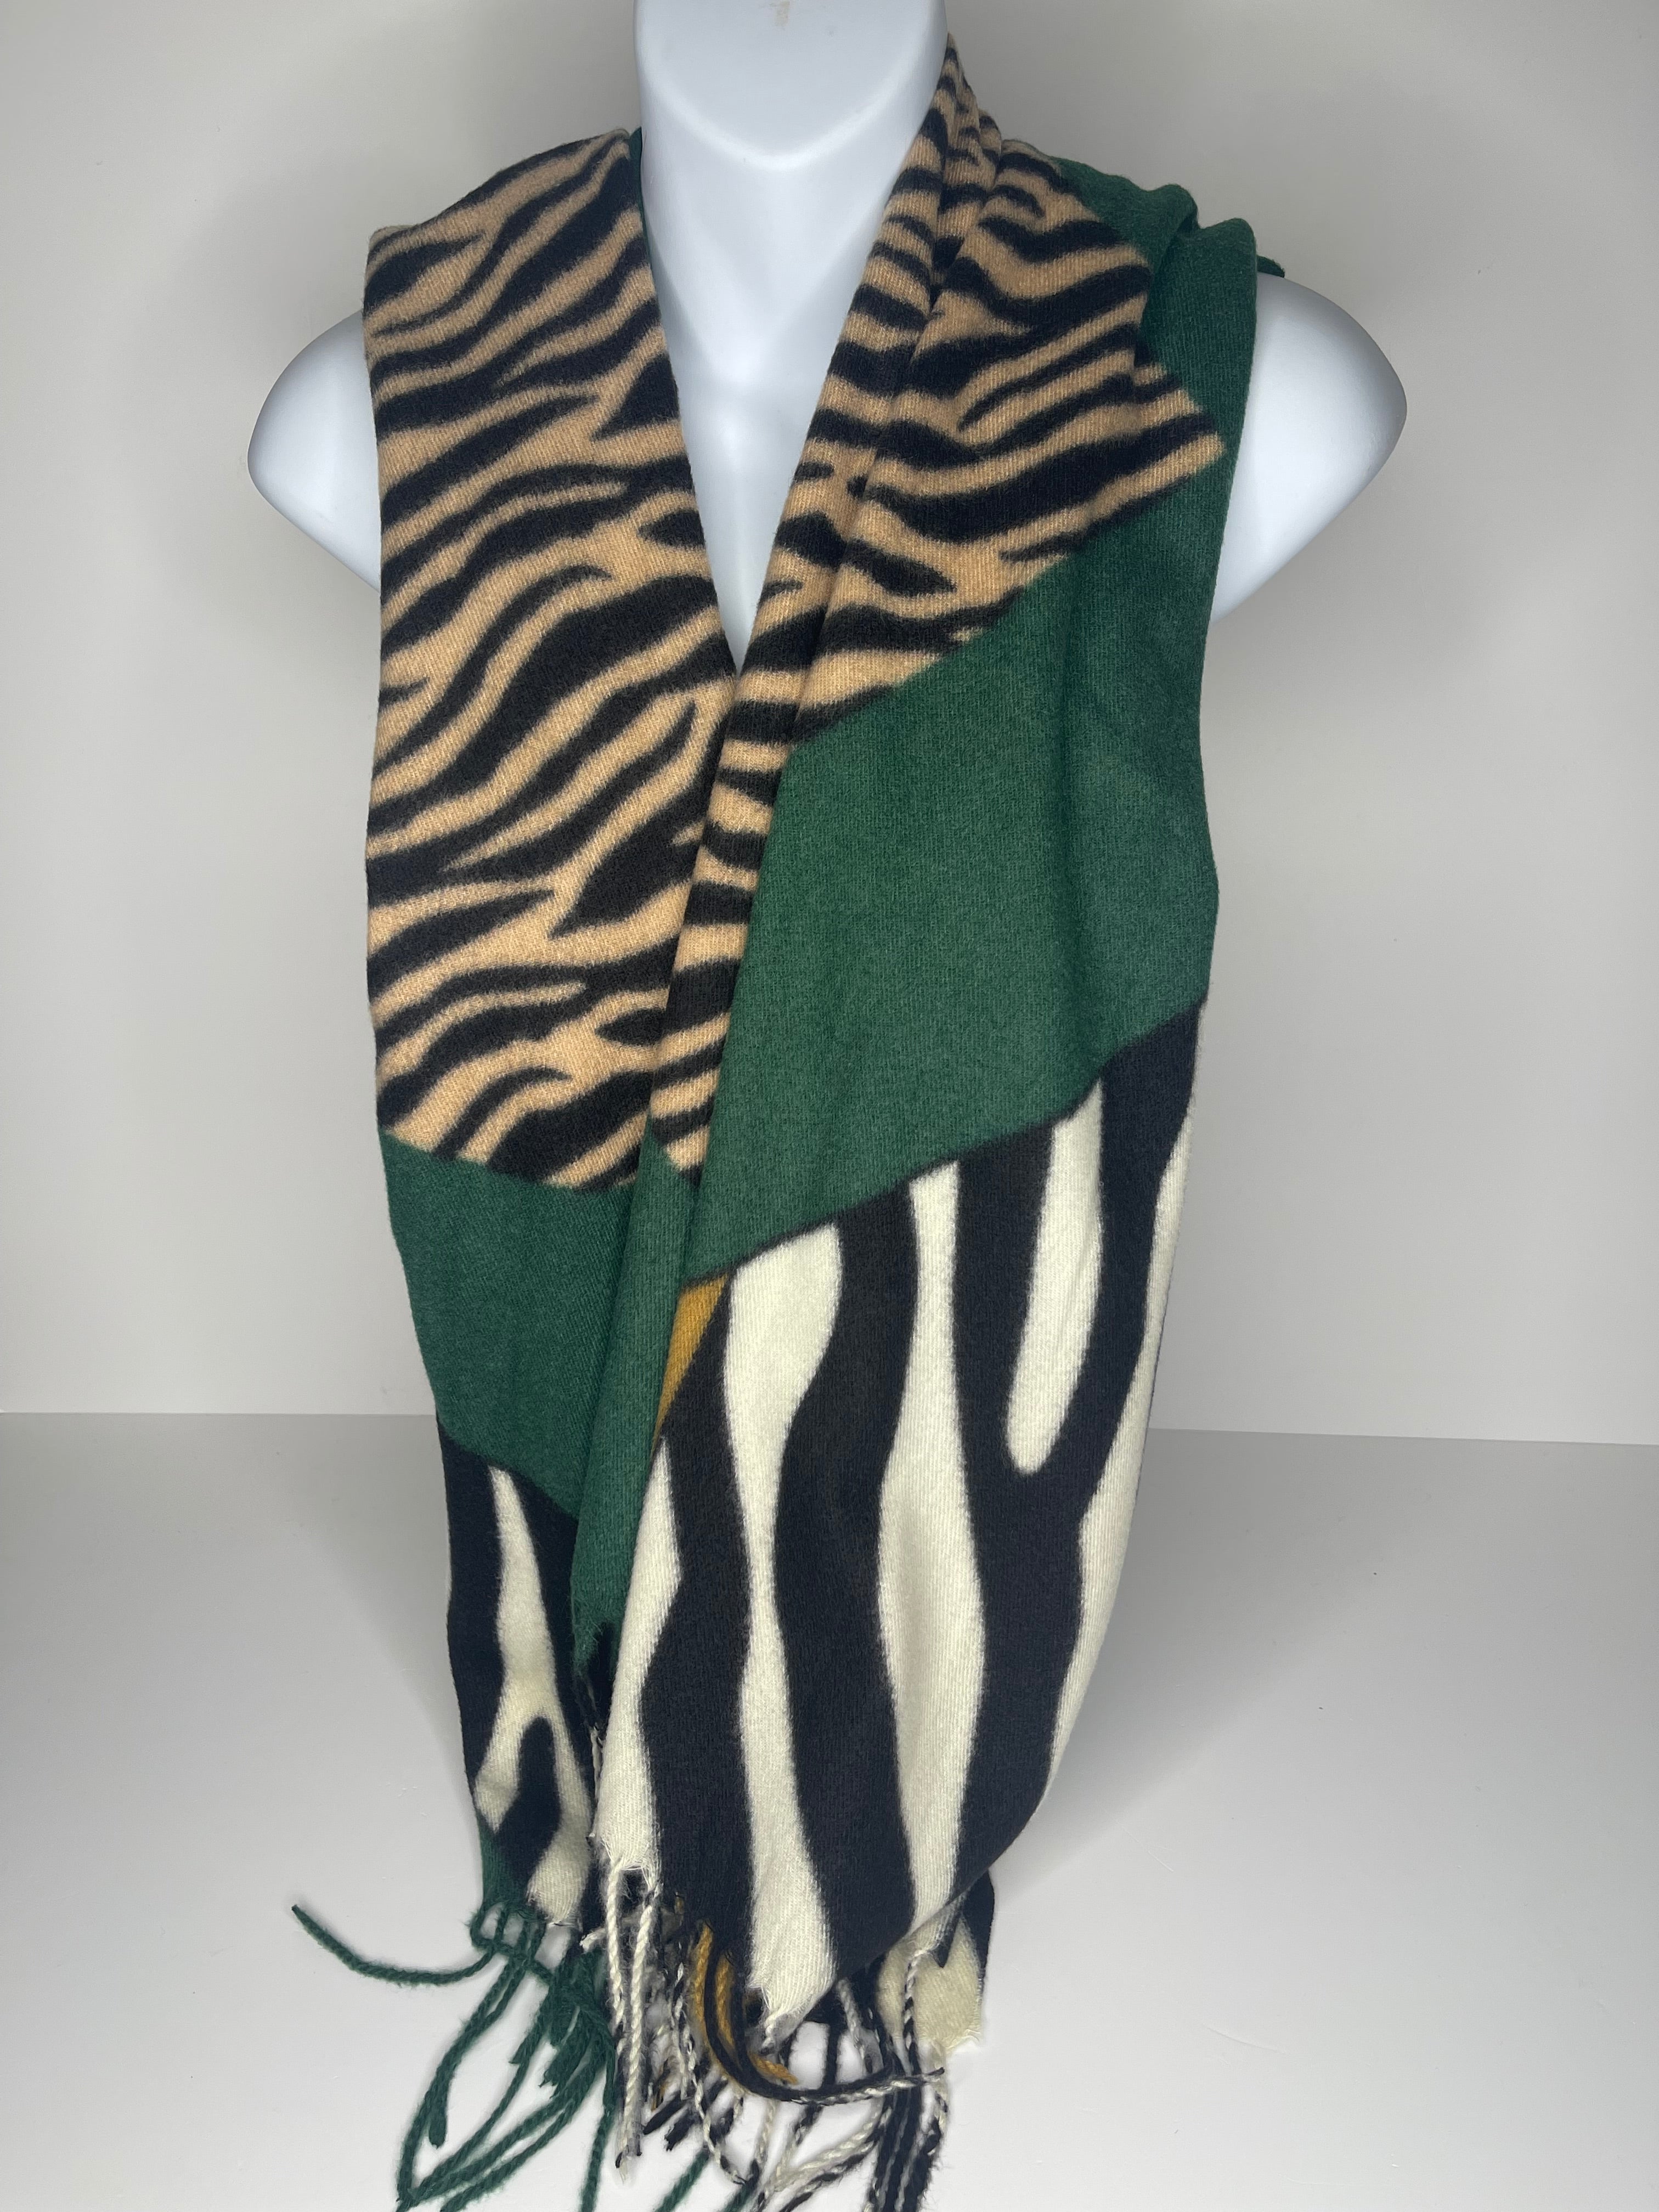 Winter weight, cashmere-mix zebra print scarf in shades of green, mustard, black and cream